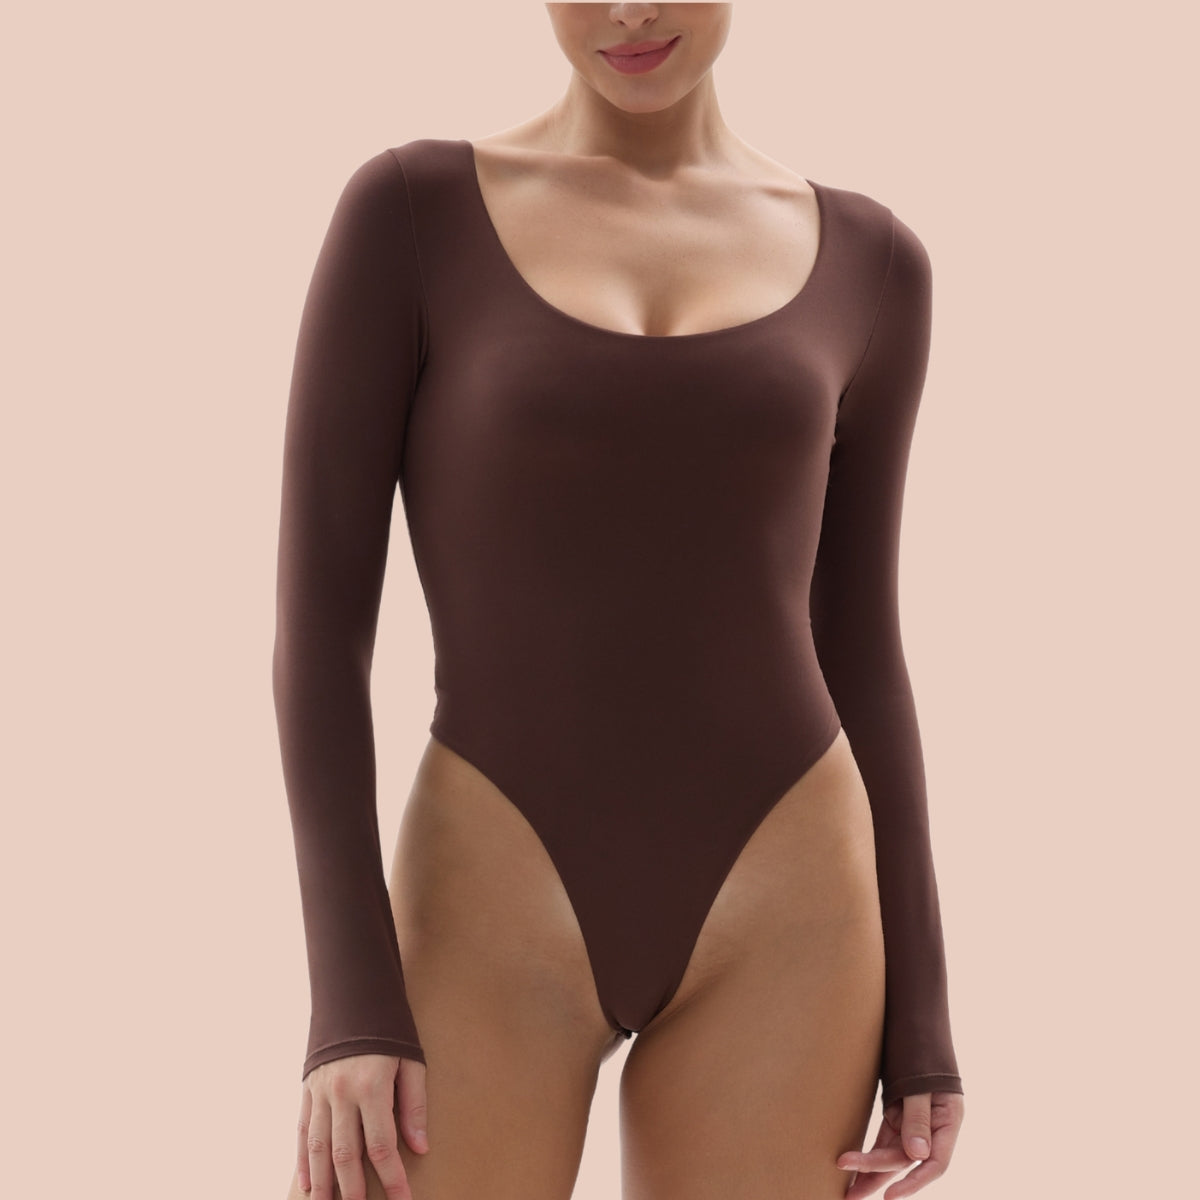 S H A P E R X Body Shapers Review - Soft & Seamless Tops, Eastleigh  Wholesalers